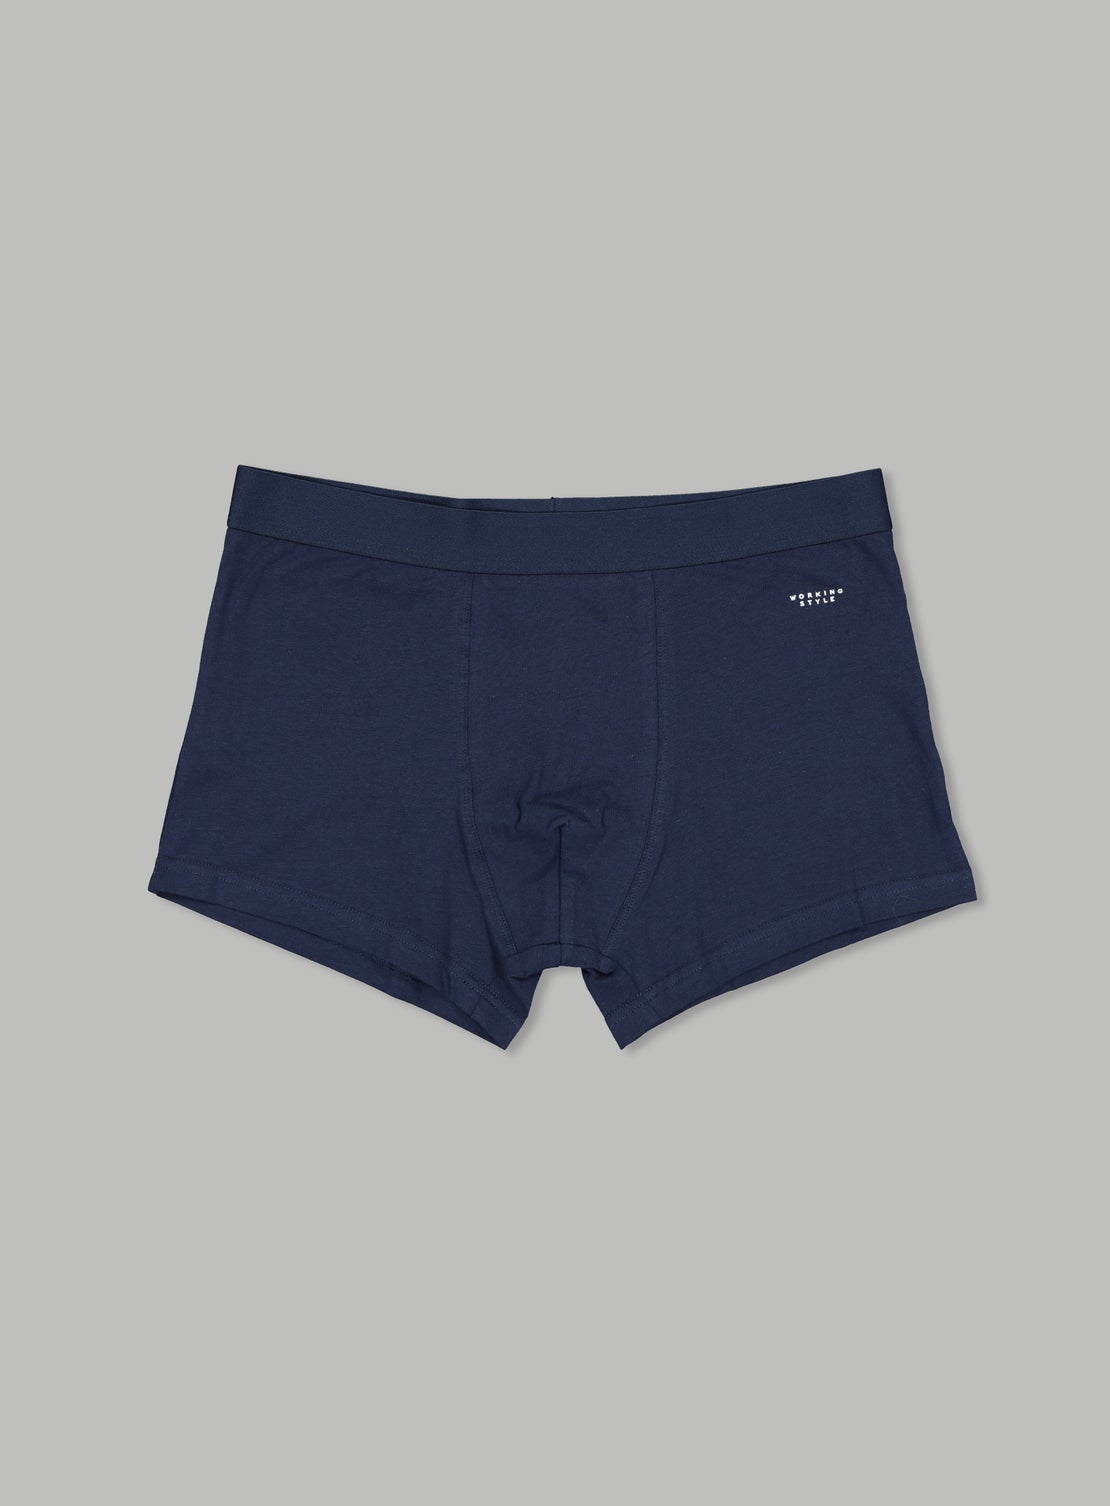 *Navy Cotton Fitted Trunks